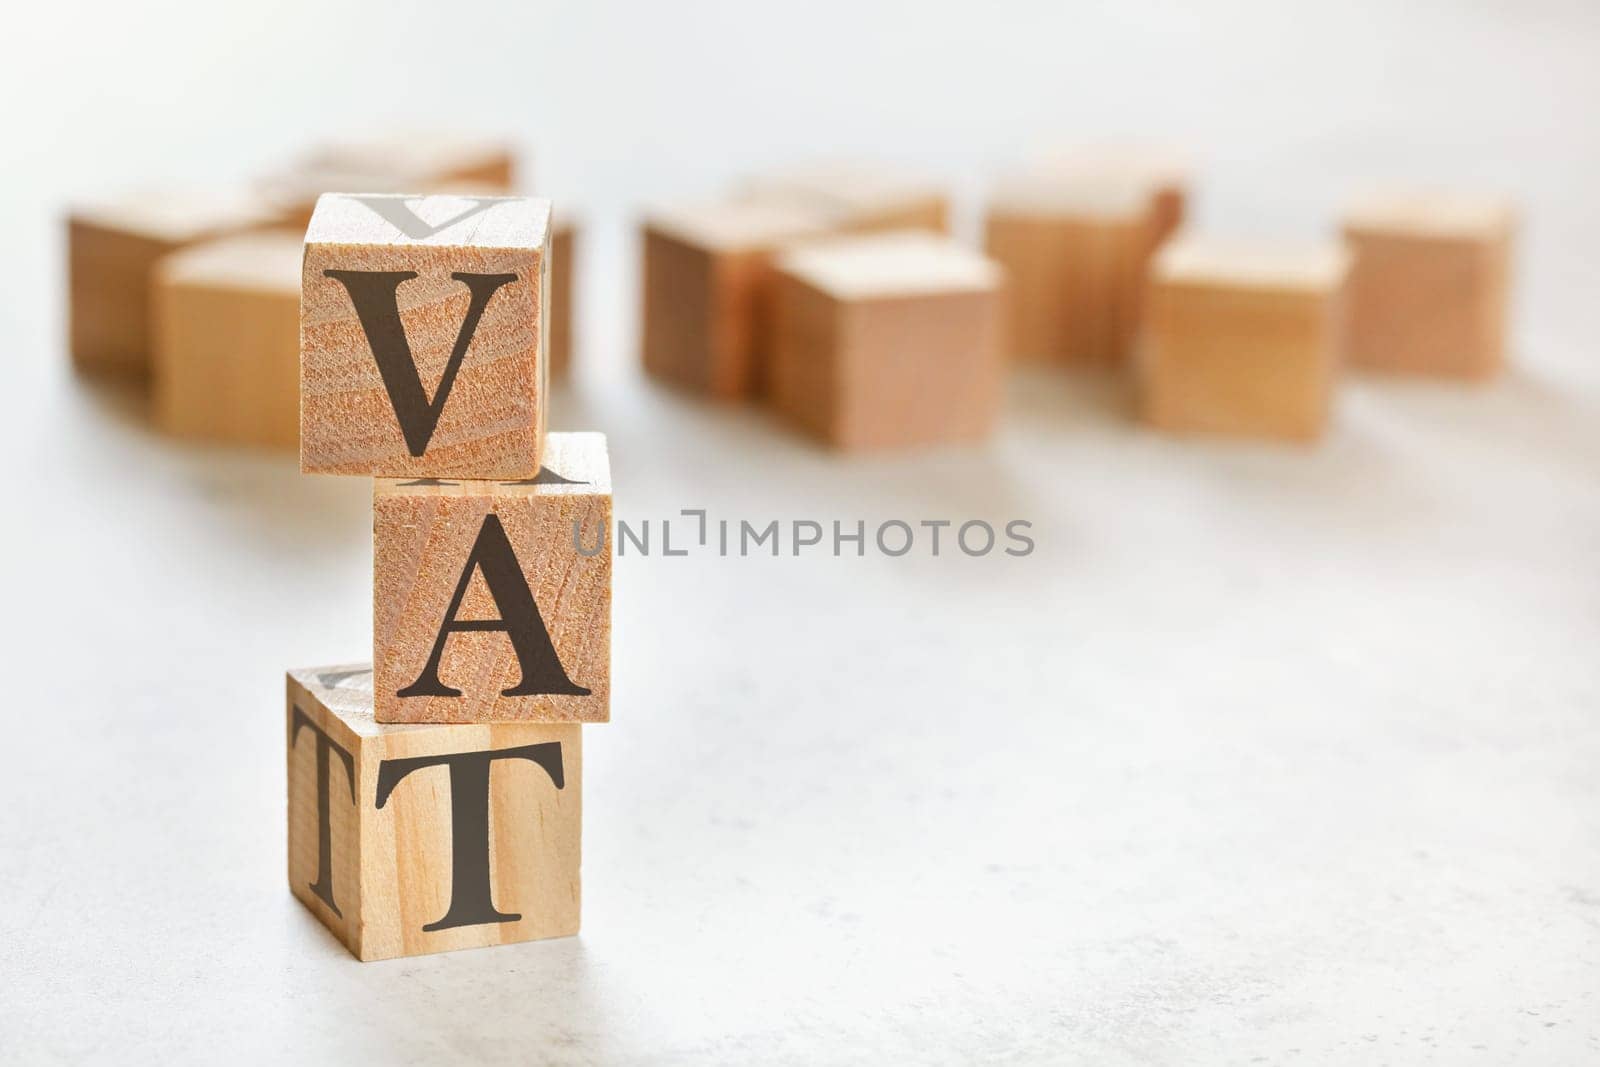 Three wooden cubes with letters VAT (means Value Added Tax), on white table, more in background, space for text in right down corner